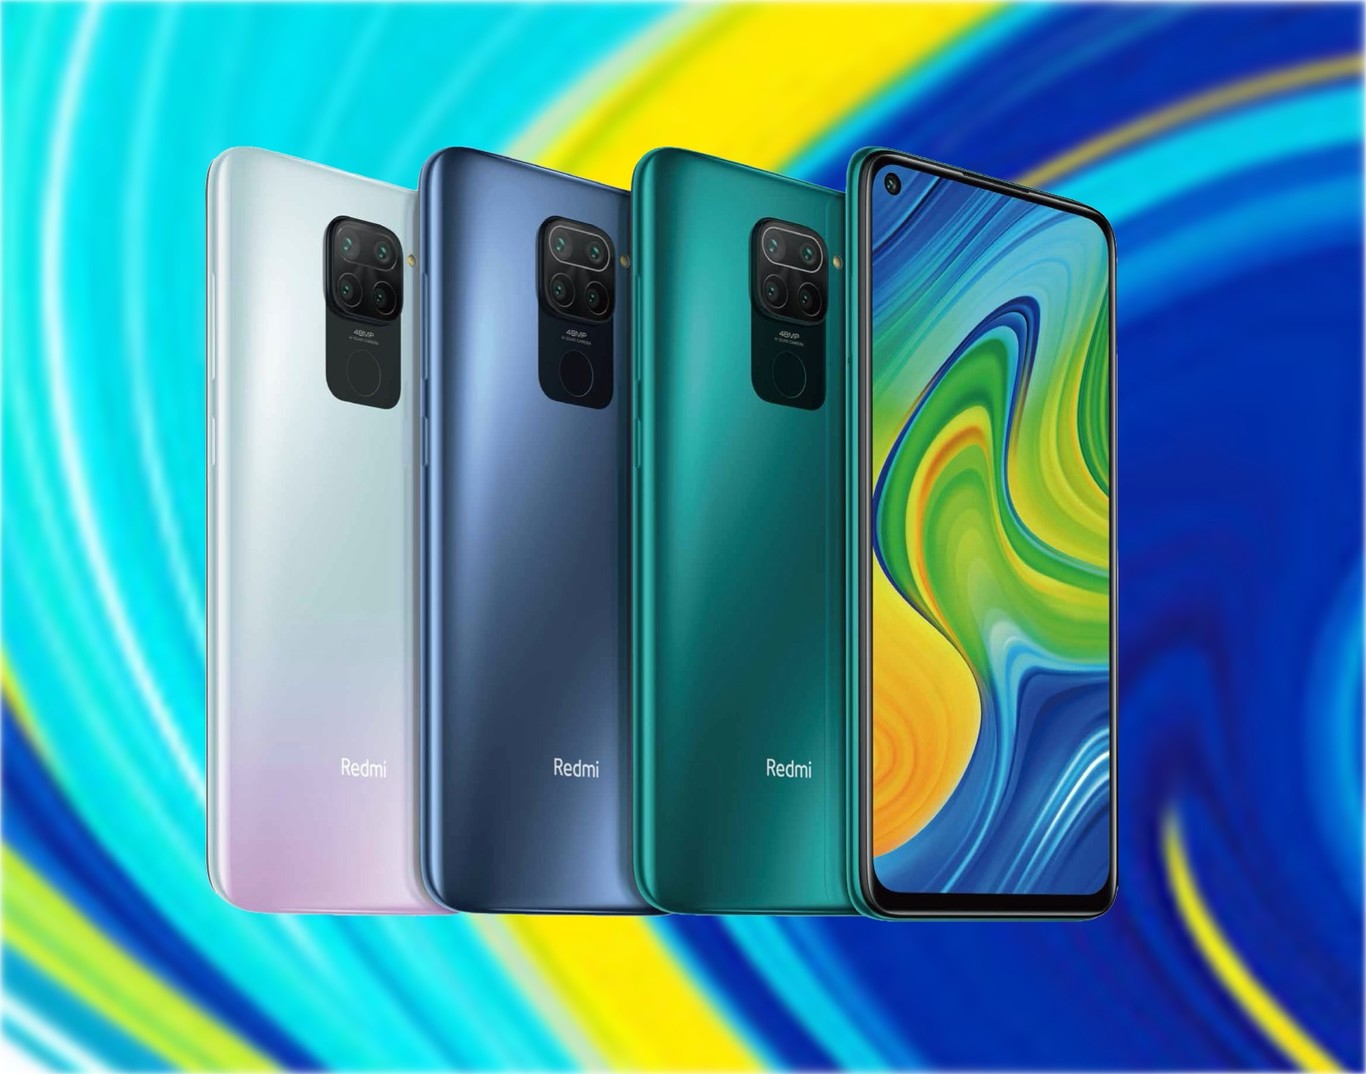 Xiaomi Redmi Note 9 a huge battery and four rear cameras to try to become one of the best selling mid range of the year again